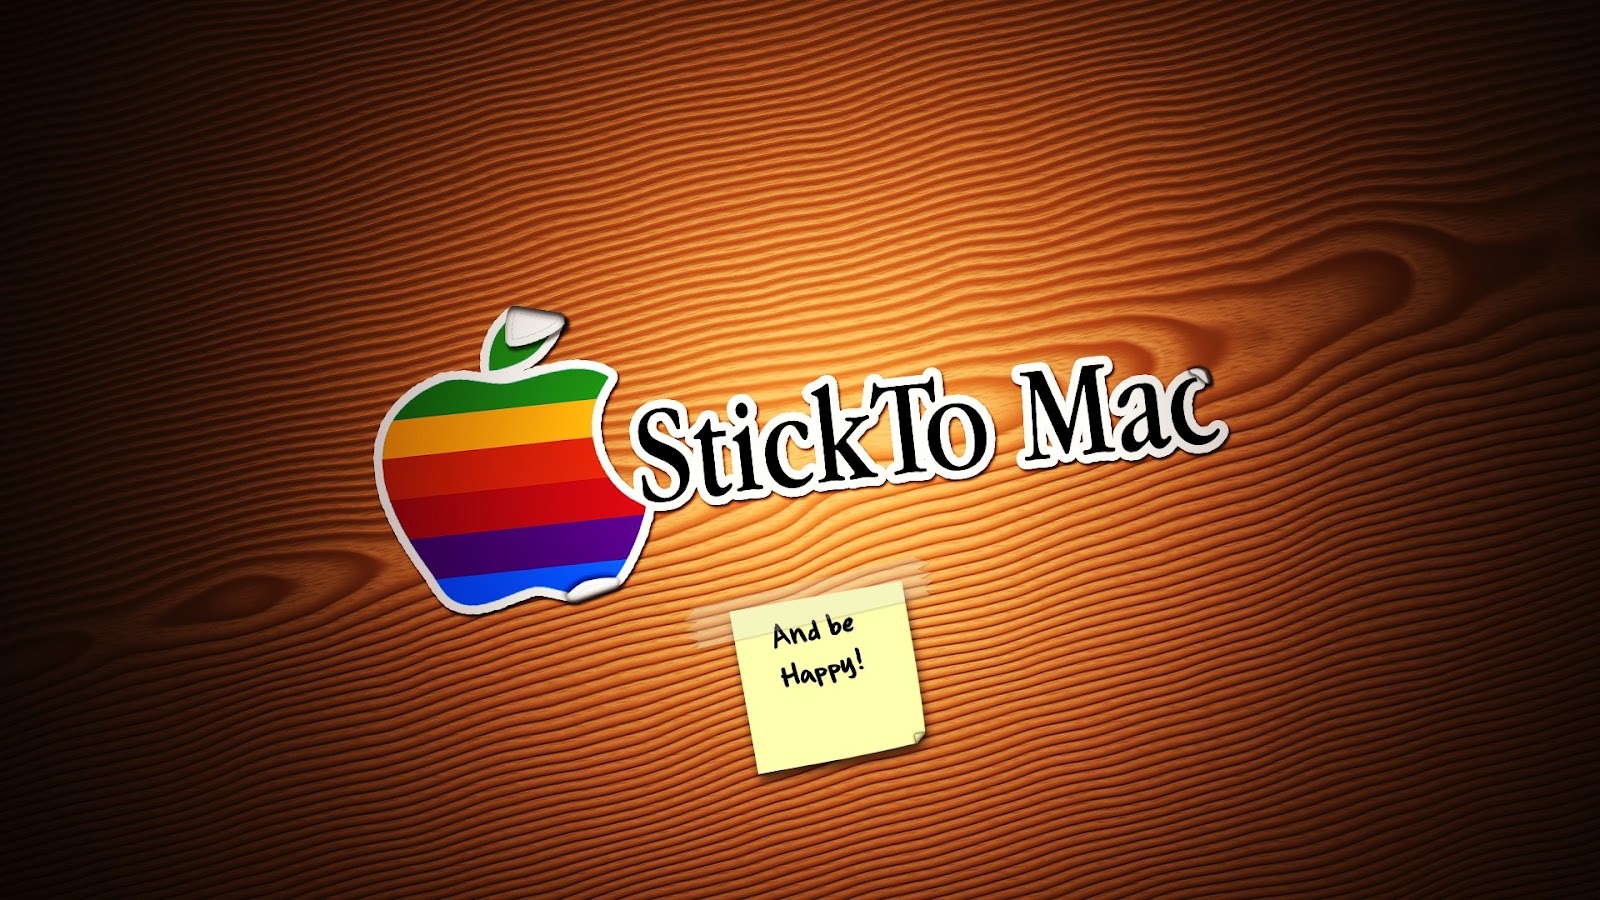 Awesome HD Wallpaper Mac Image In Collection